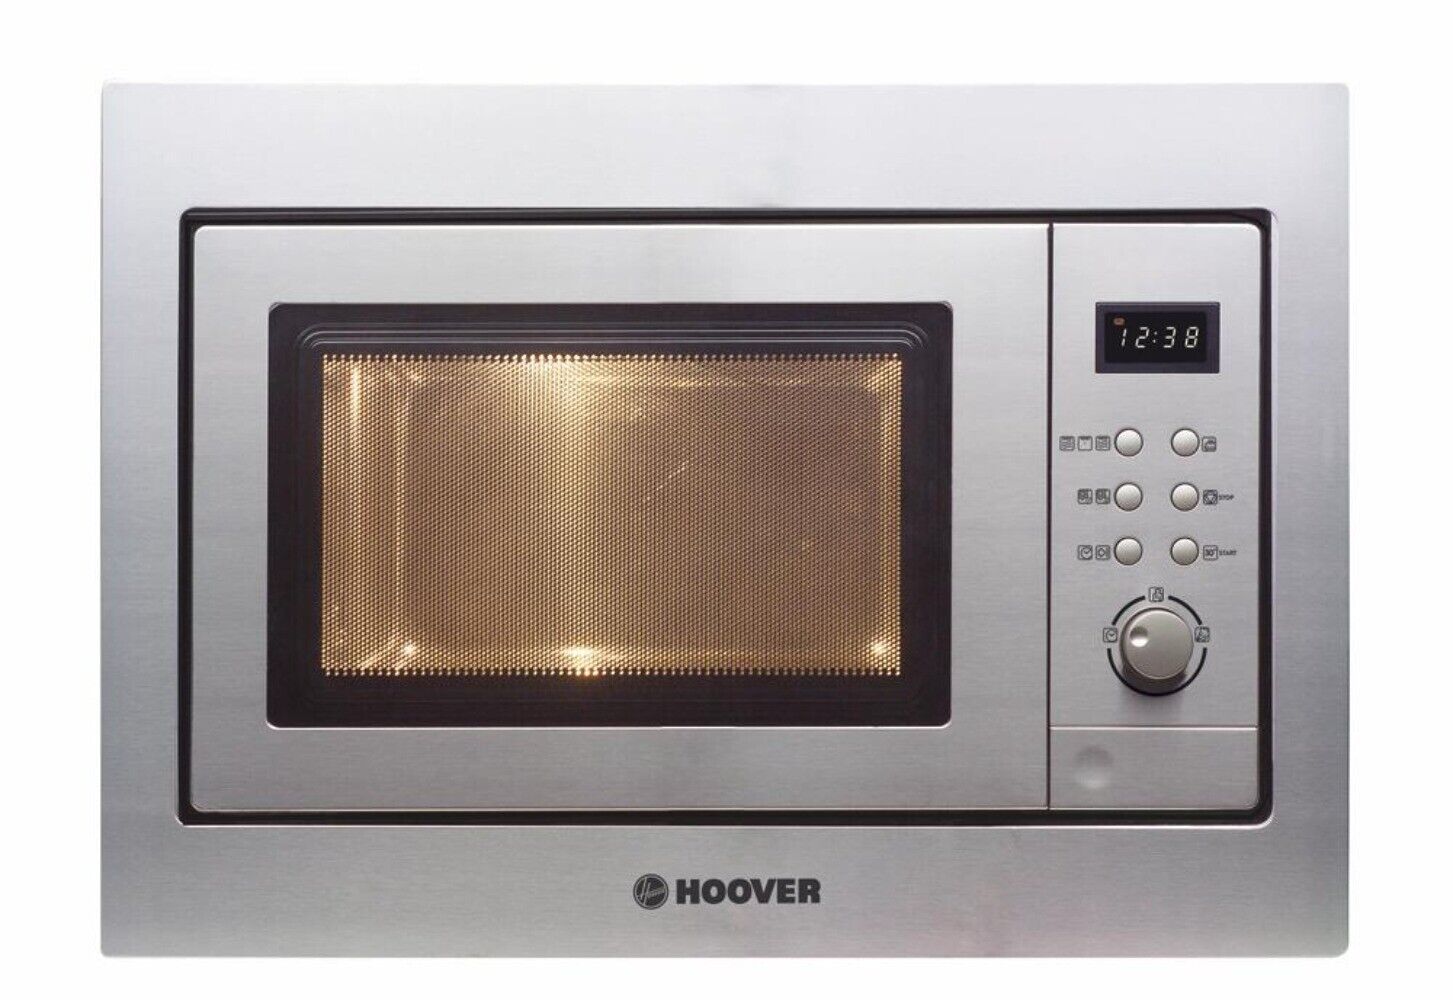 Hoover Microwave Oven-Built in-Stainless Steel-HMG171X-80- 2697